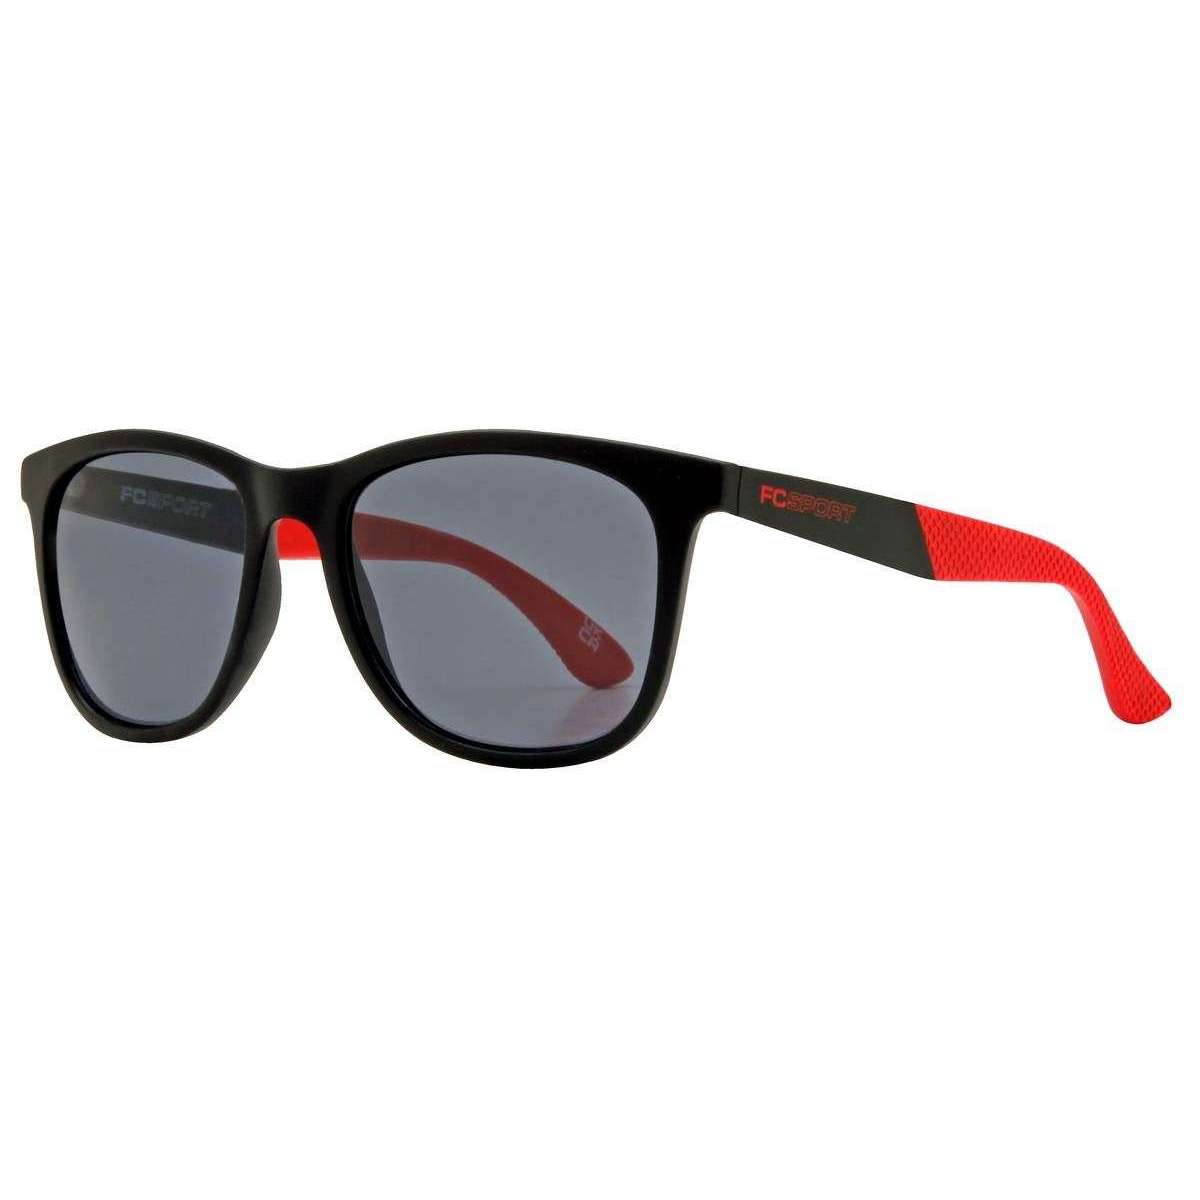 French Connection Classic D-Frame Sunglasses - Black/Red/Smoke Grey